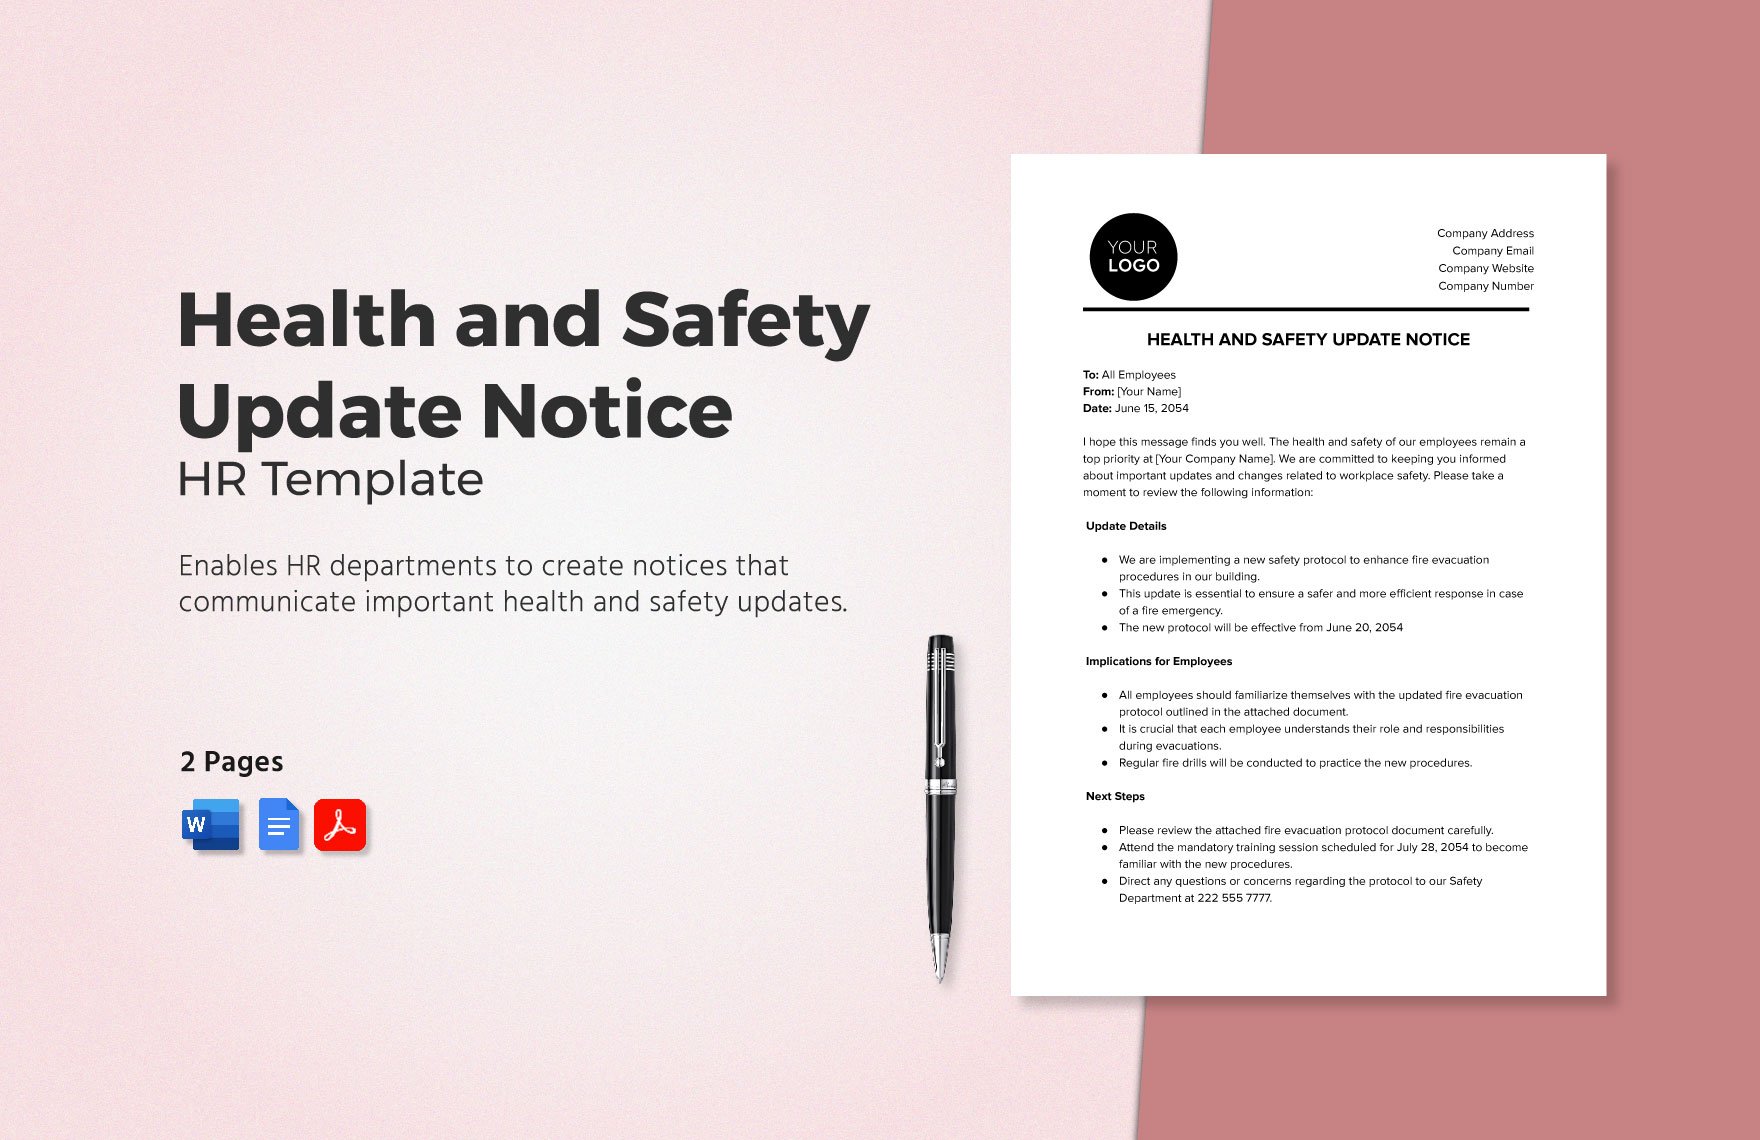 Health and Safety Update Notice HR Template